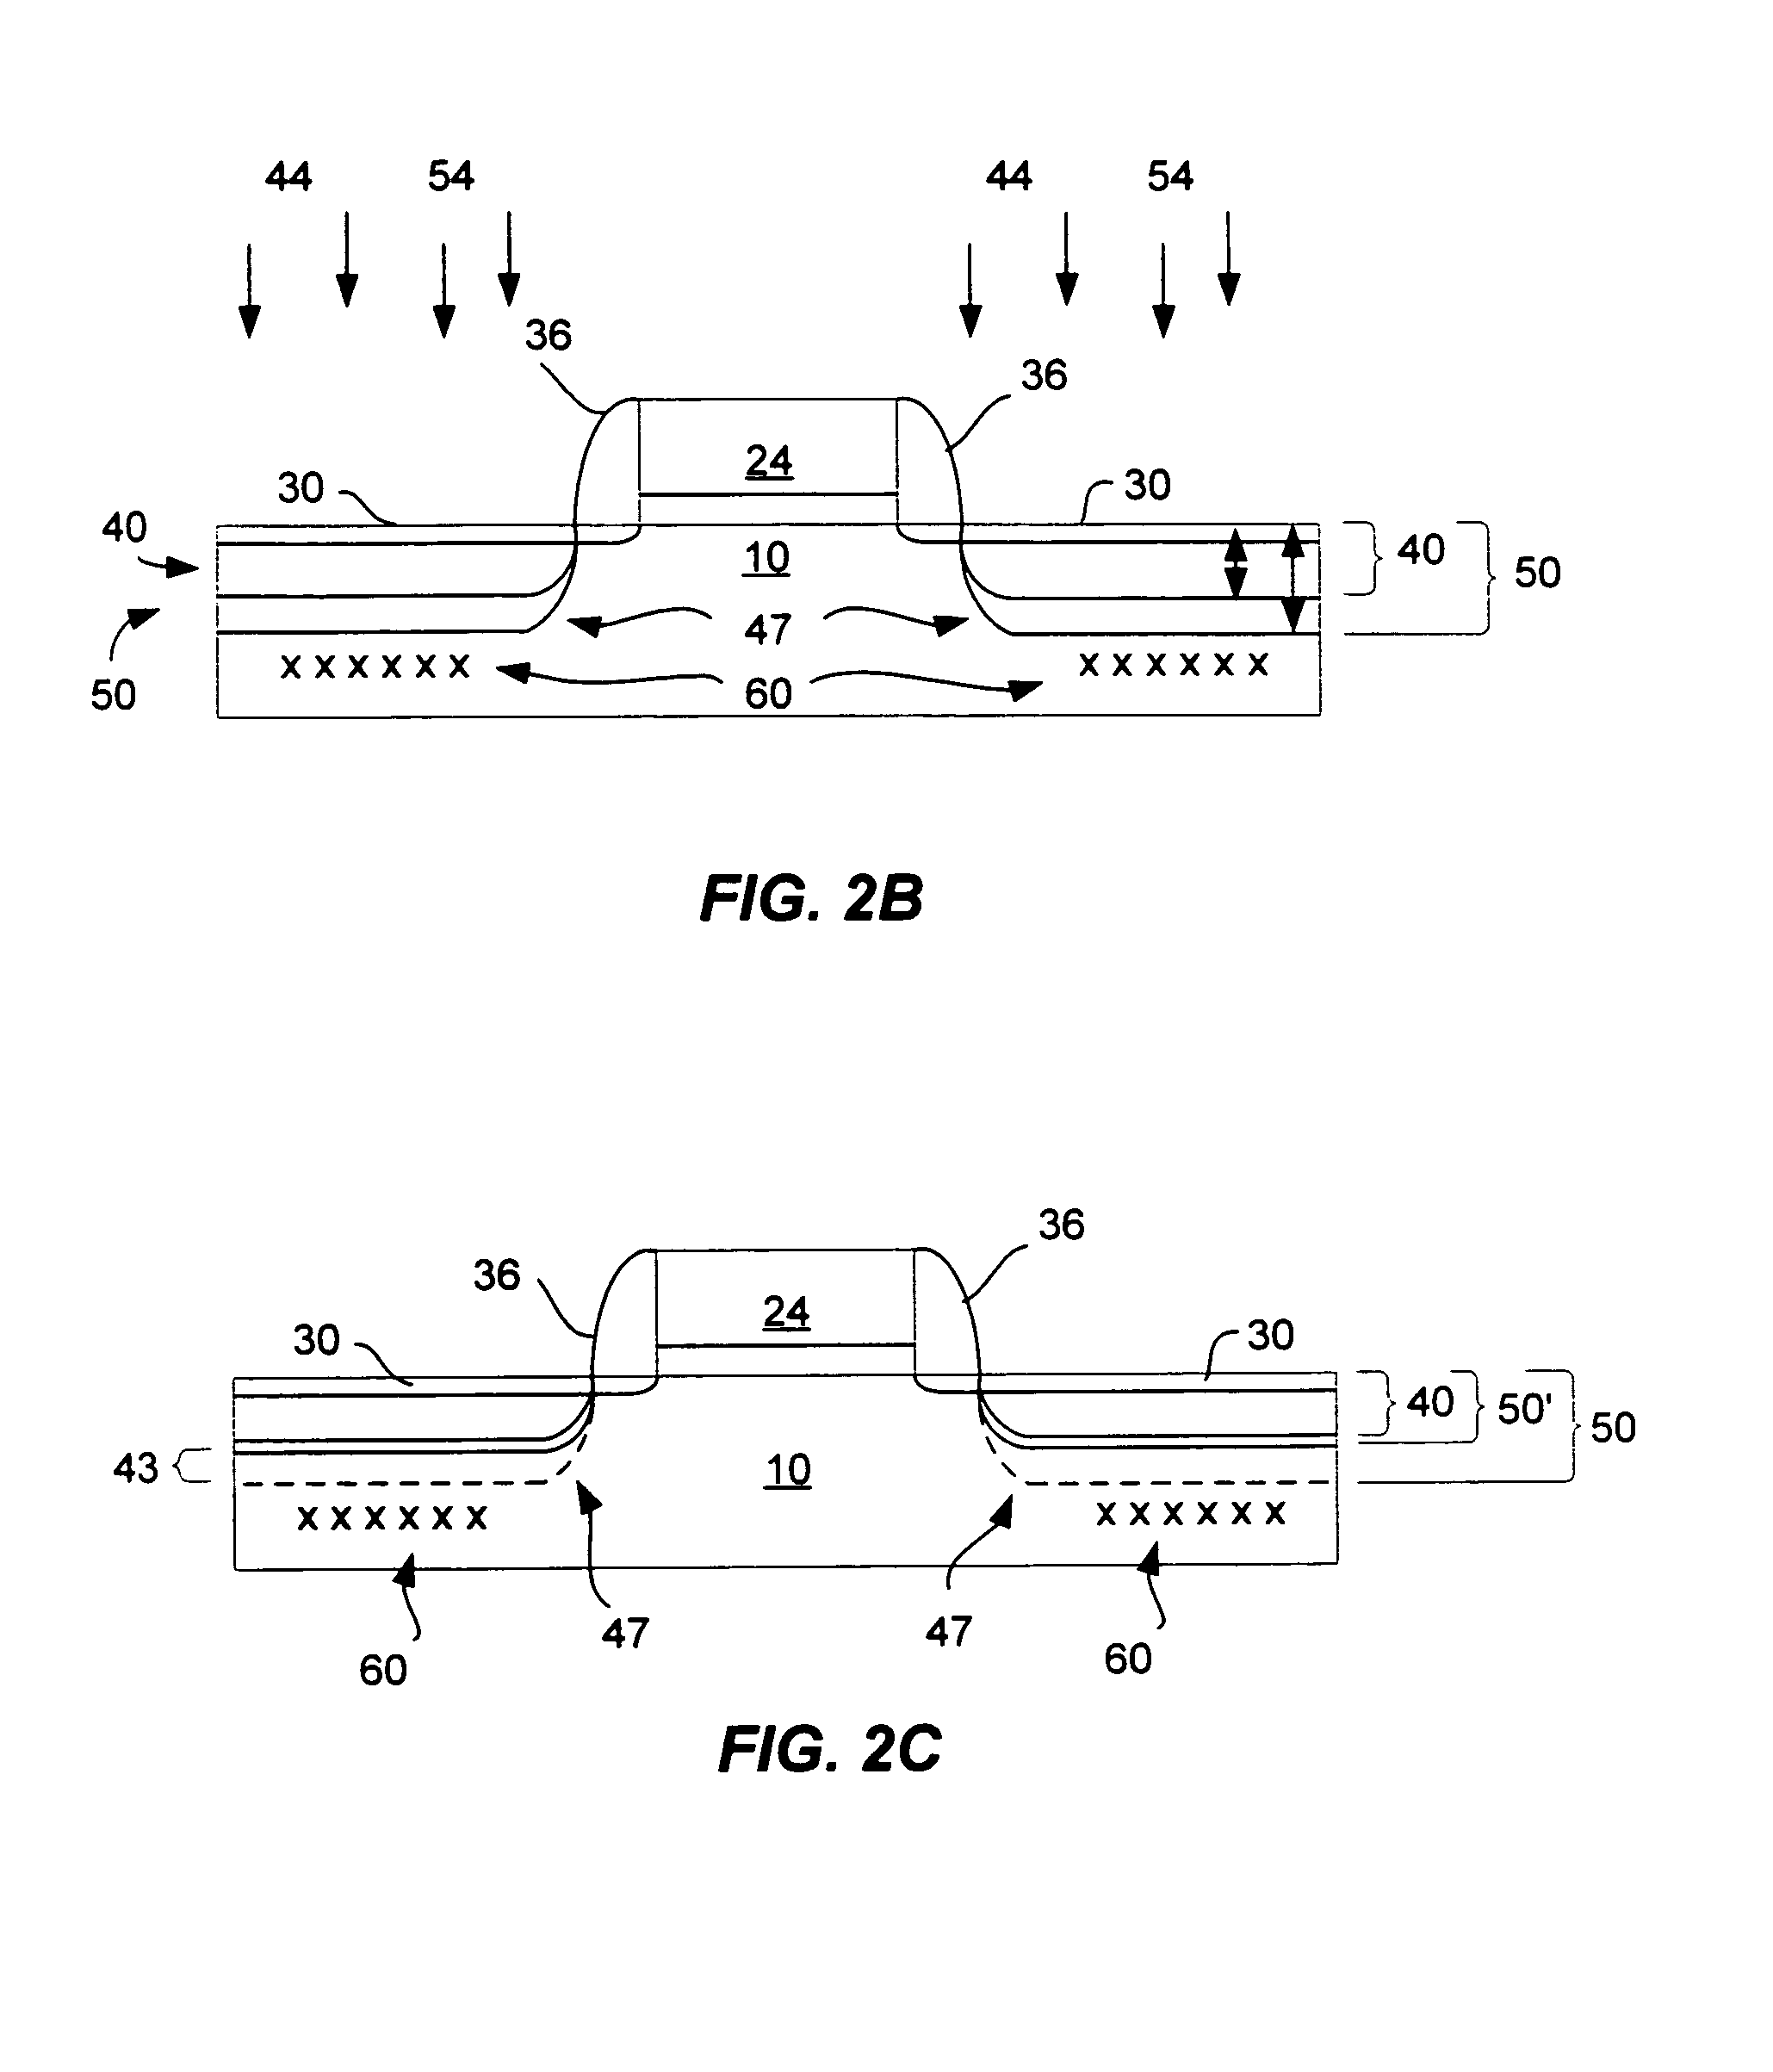 End-of-range defect minimization in semiconductor device